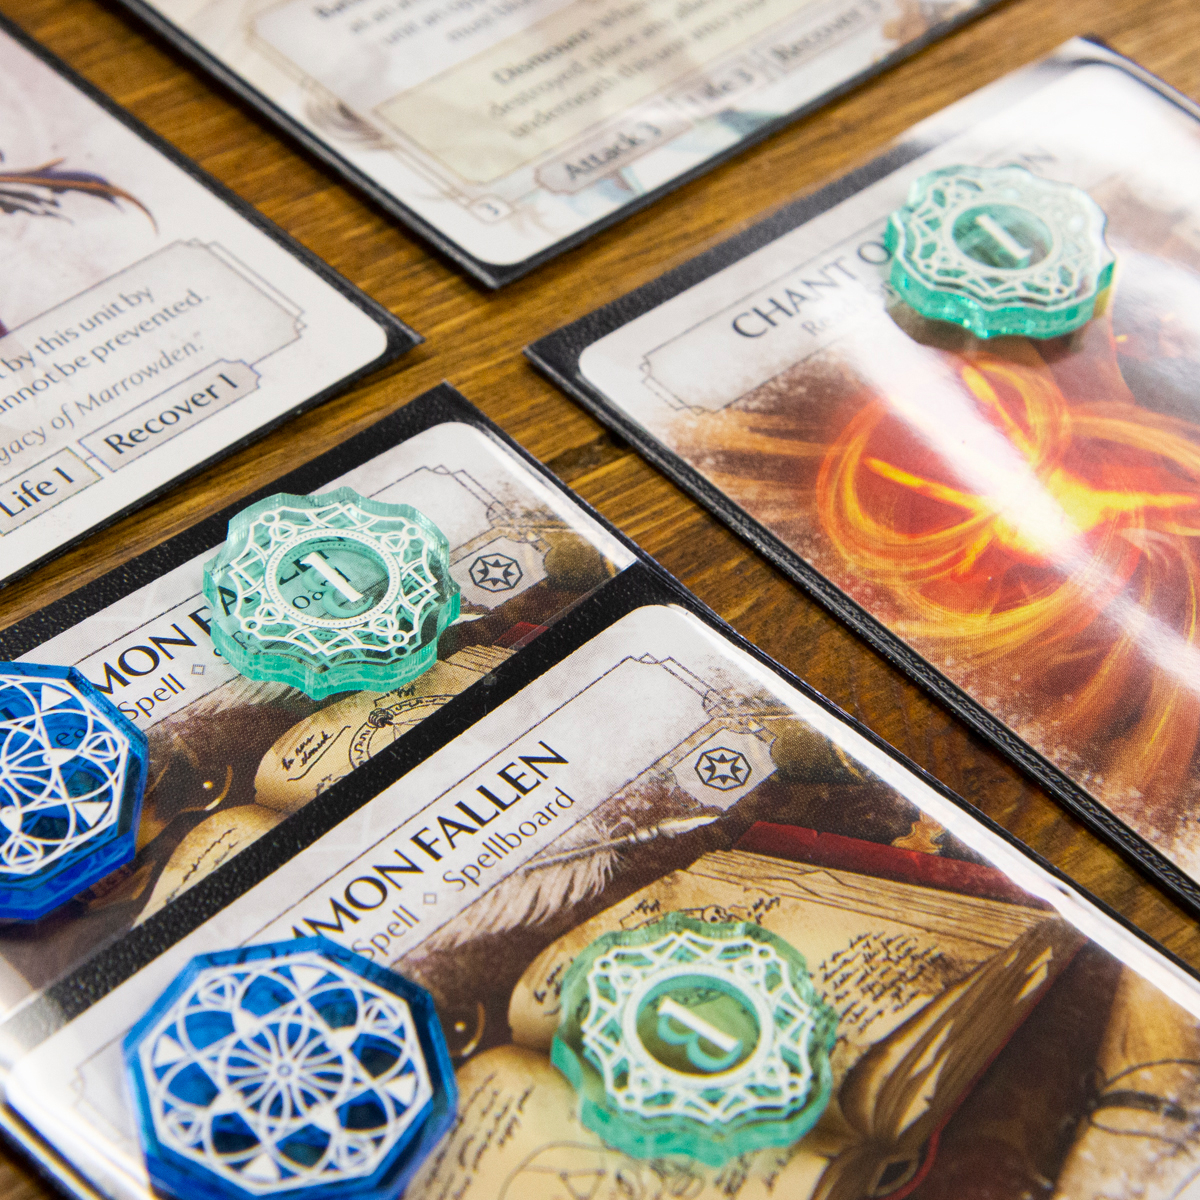 Close up of the Exhaustion and Status tokens from the Arcane Token Set as they might look in a game of Ashes: Reborn